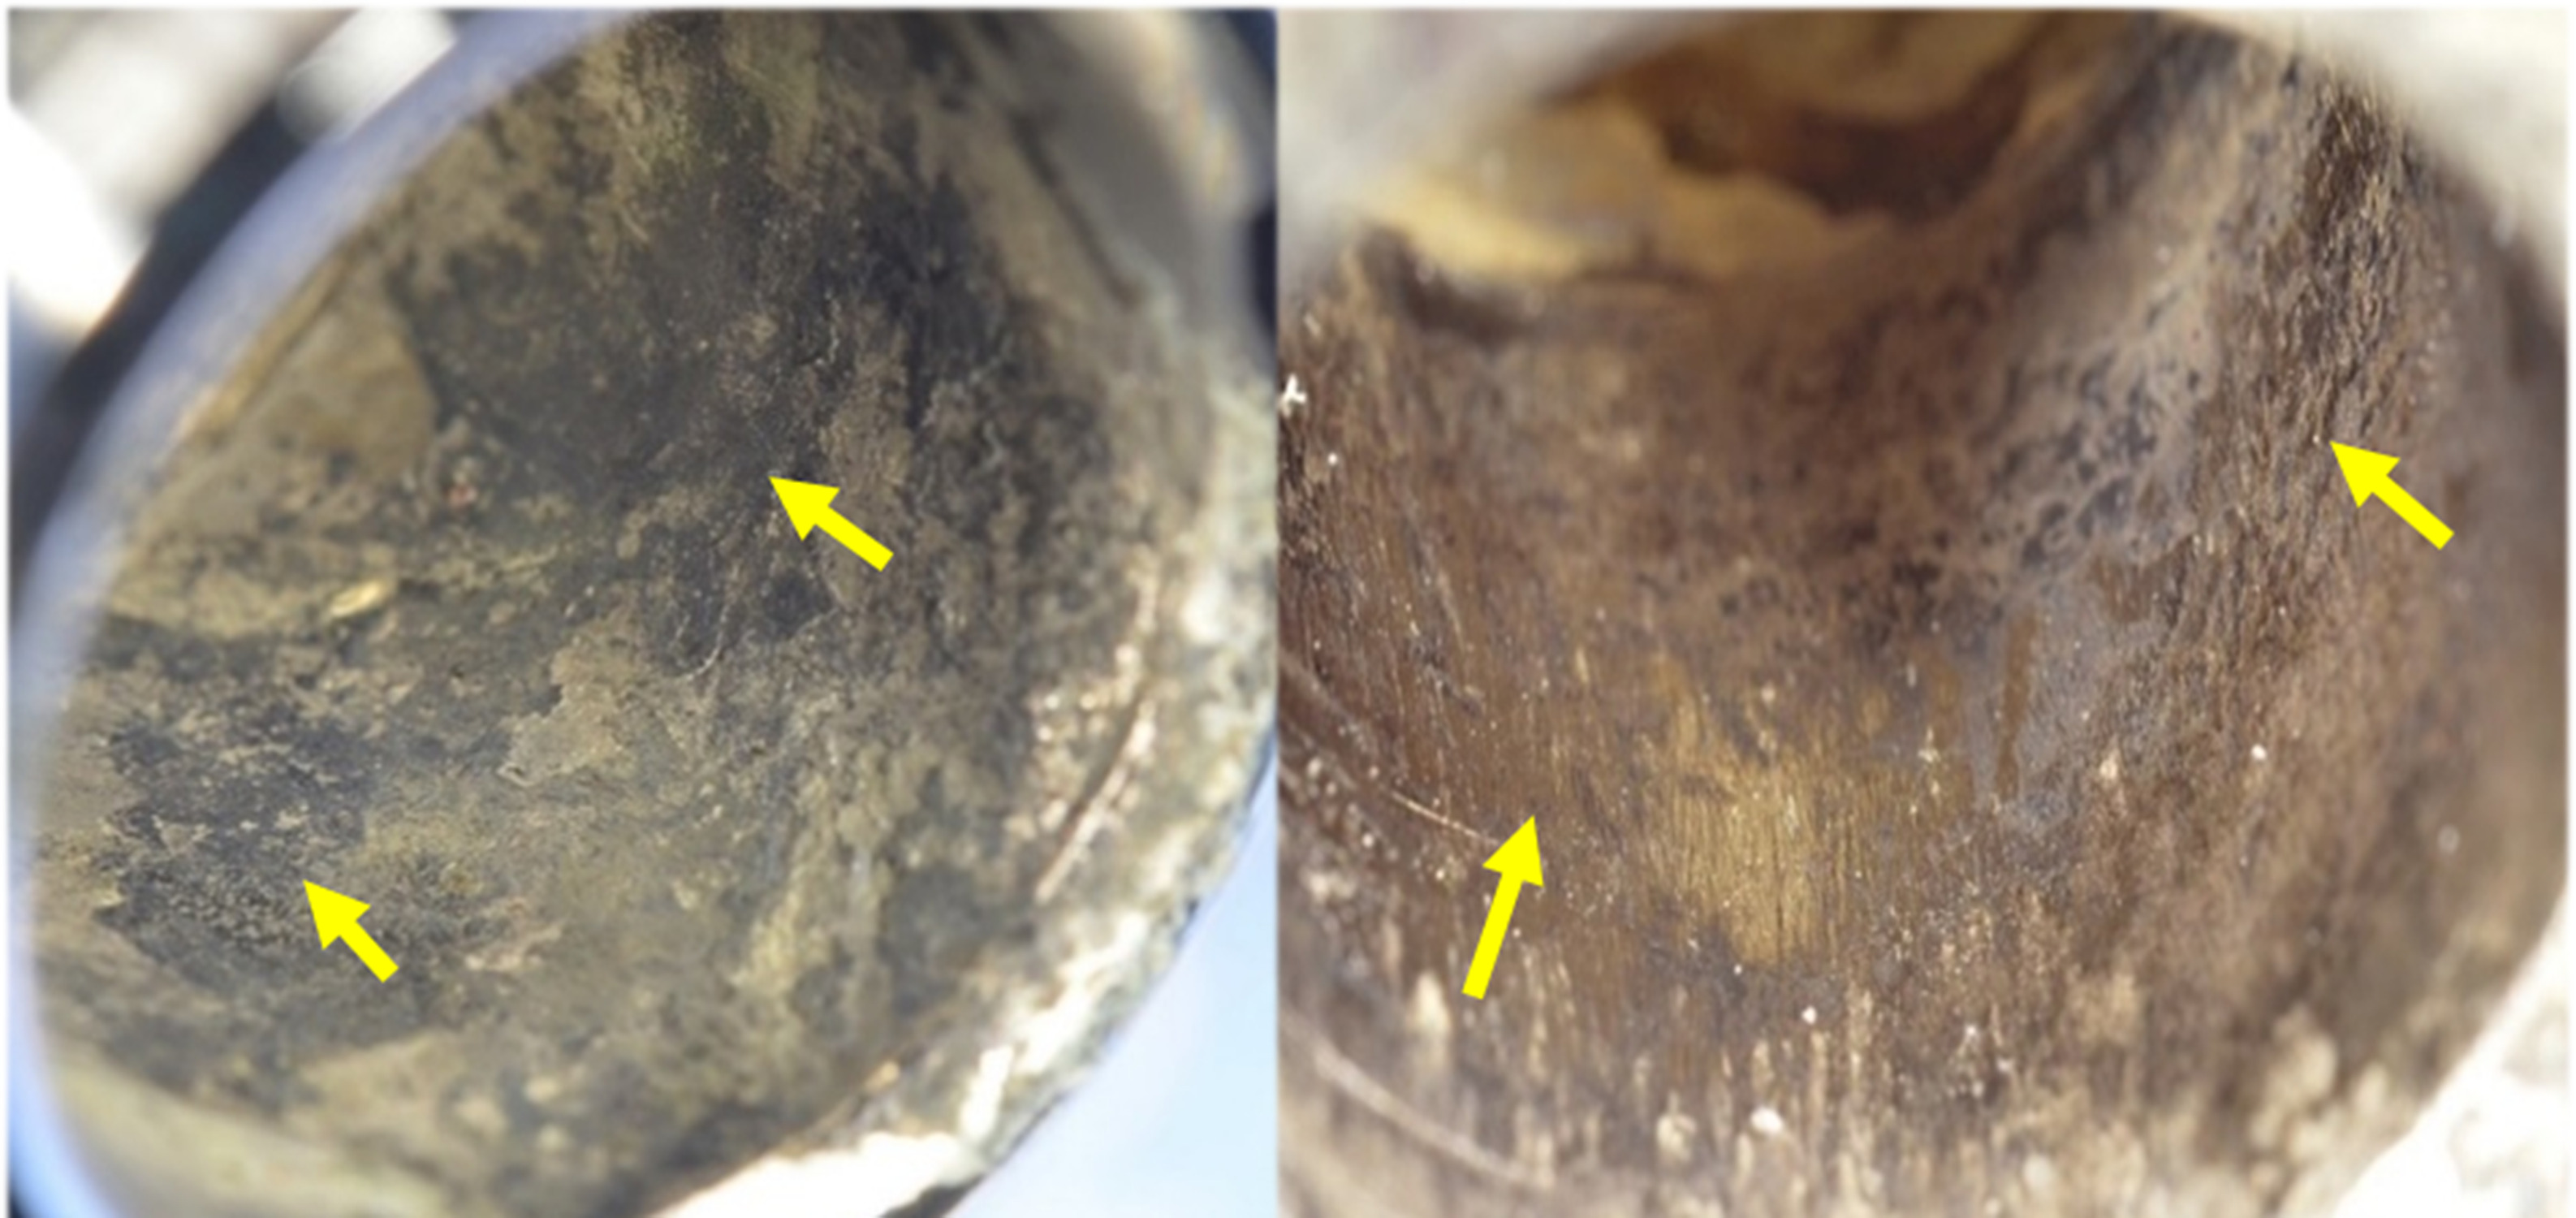 Fig. 2 
            Two examples of corrosive damage that would receive a grade of 4 using the Goldberg score due to the presence of deposits, but are further distinguished as a 6 using the visual grading system score, due to the extent or severity of the deposit, which is both thick, black, and obscures more than 50% of the contact surface, as indicated by the arrows (note: photographs were taken prior to destructive cleaning).
          